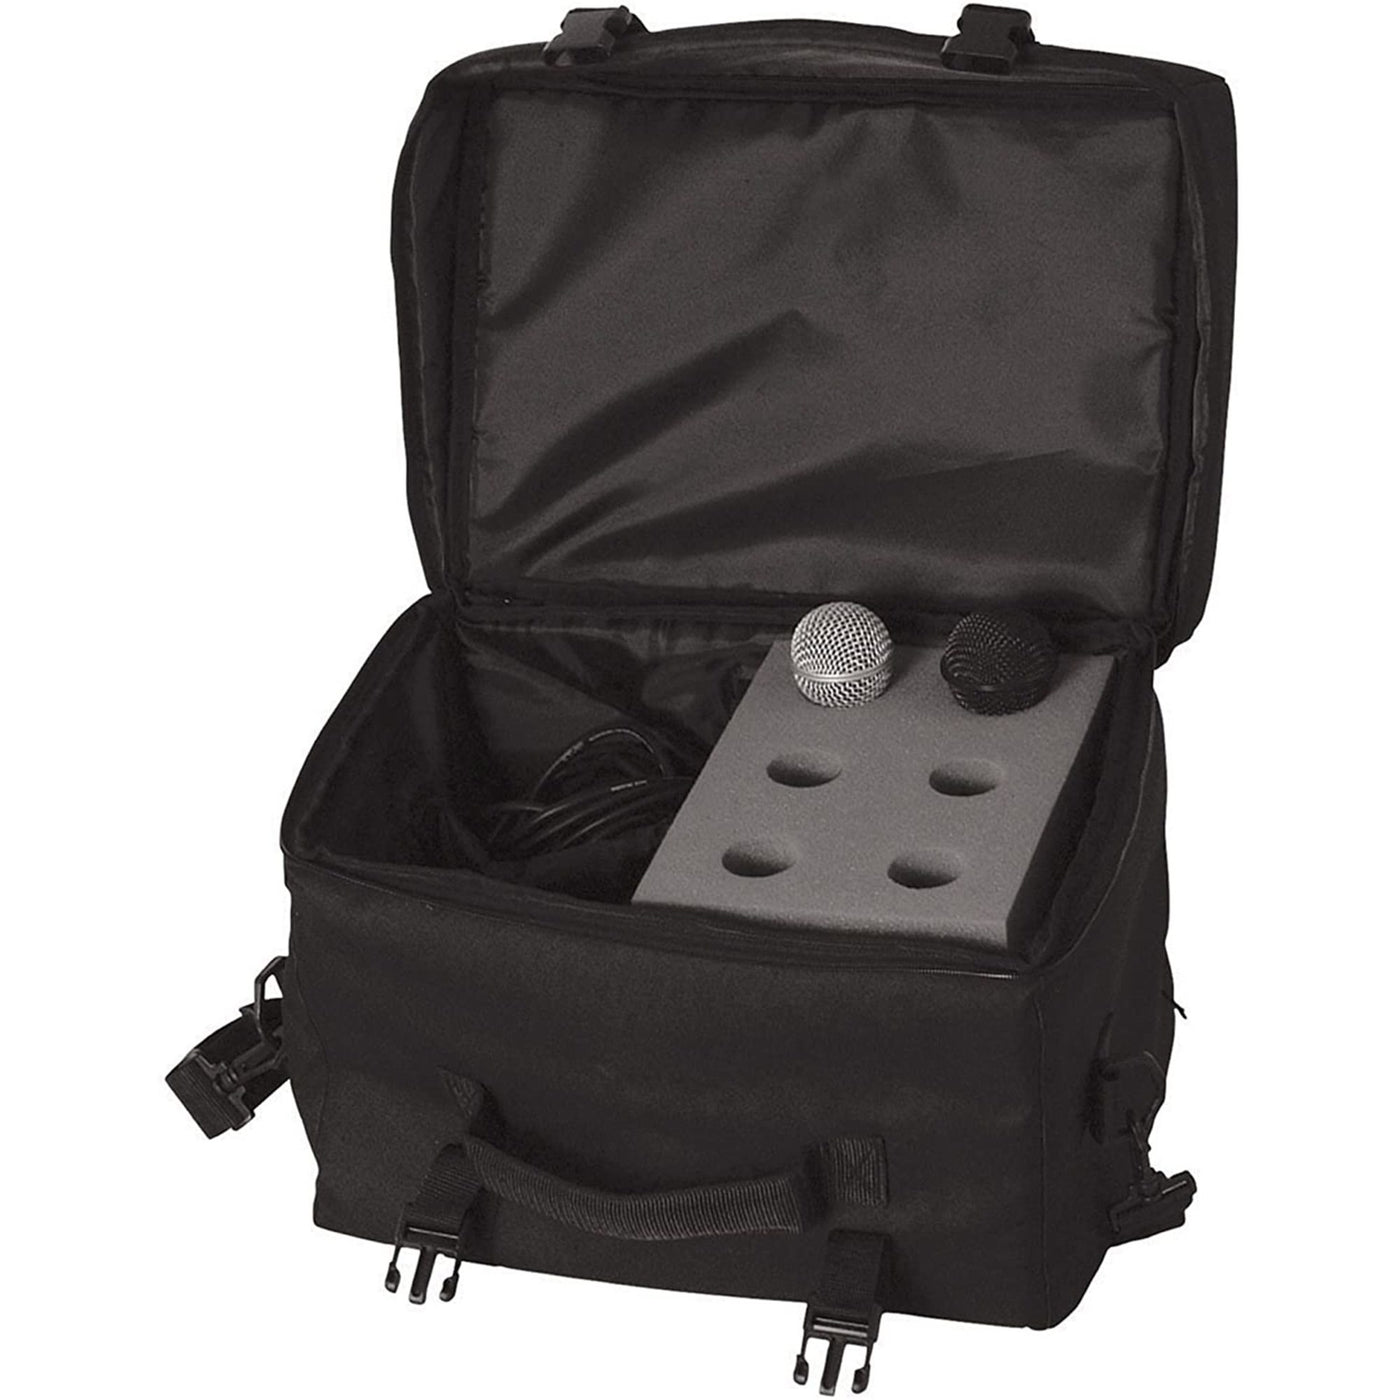 Microphone Bag for Microphones